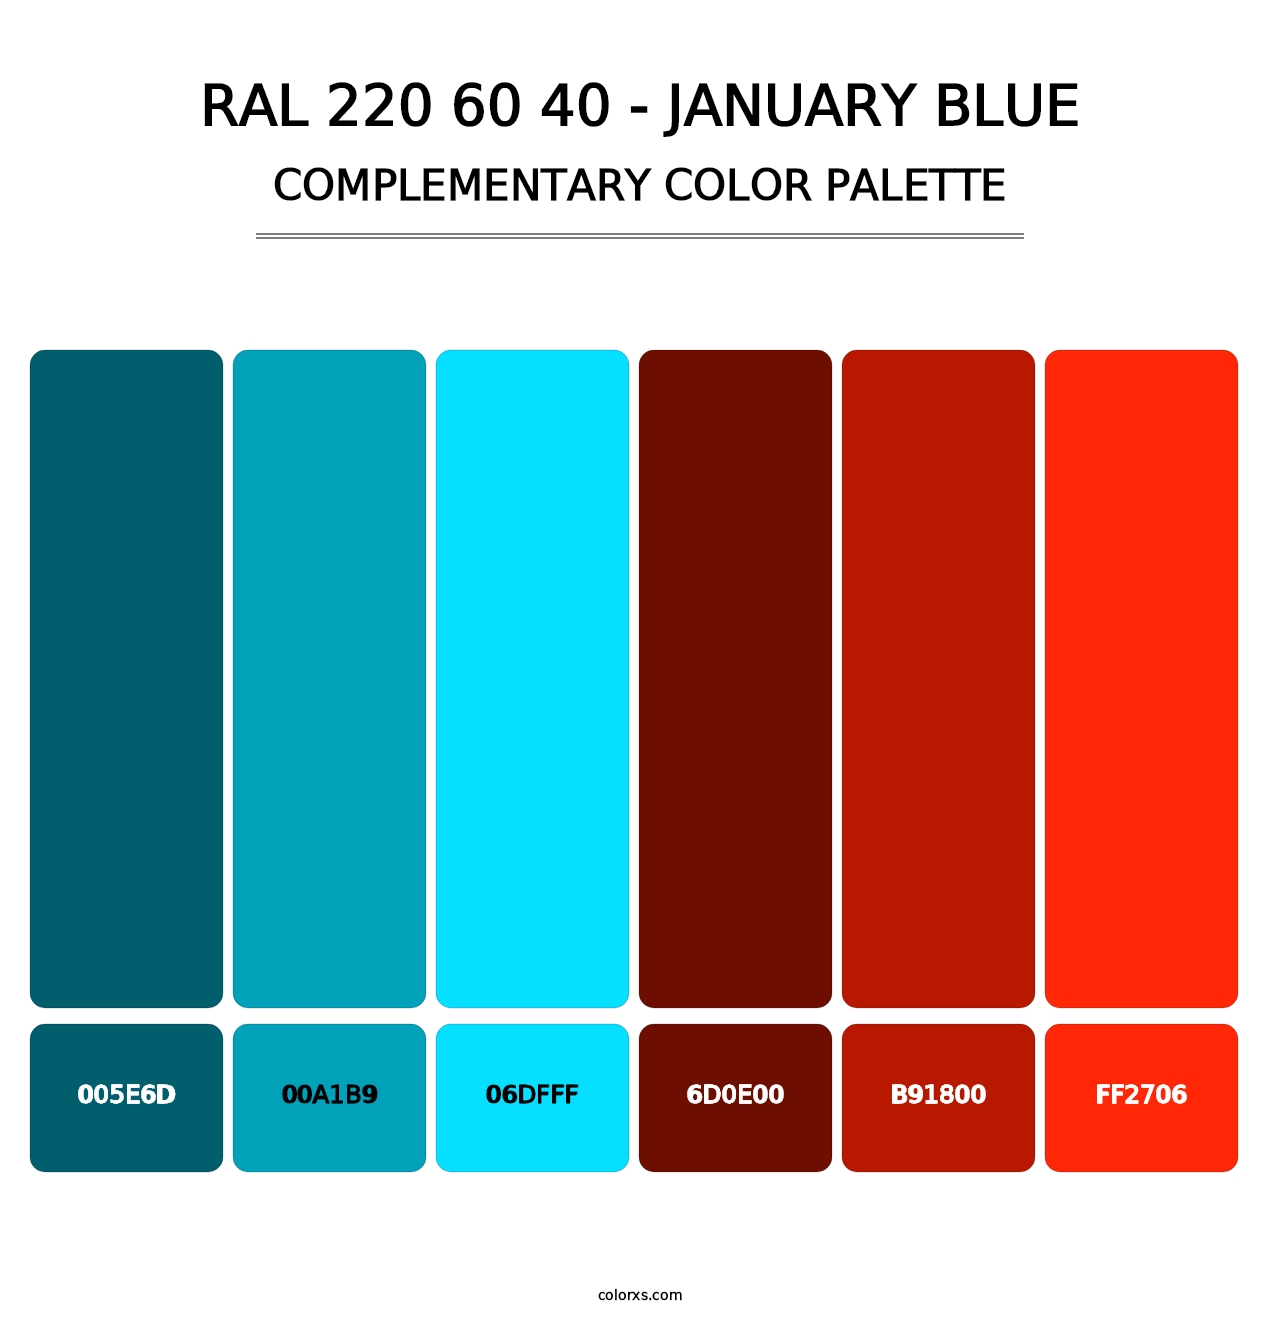 RAL 220 60 40 - January Blue - Complementary Color Palette